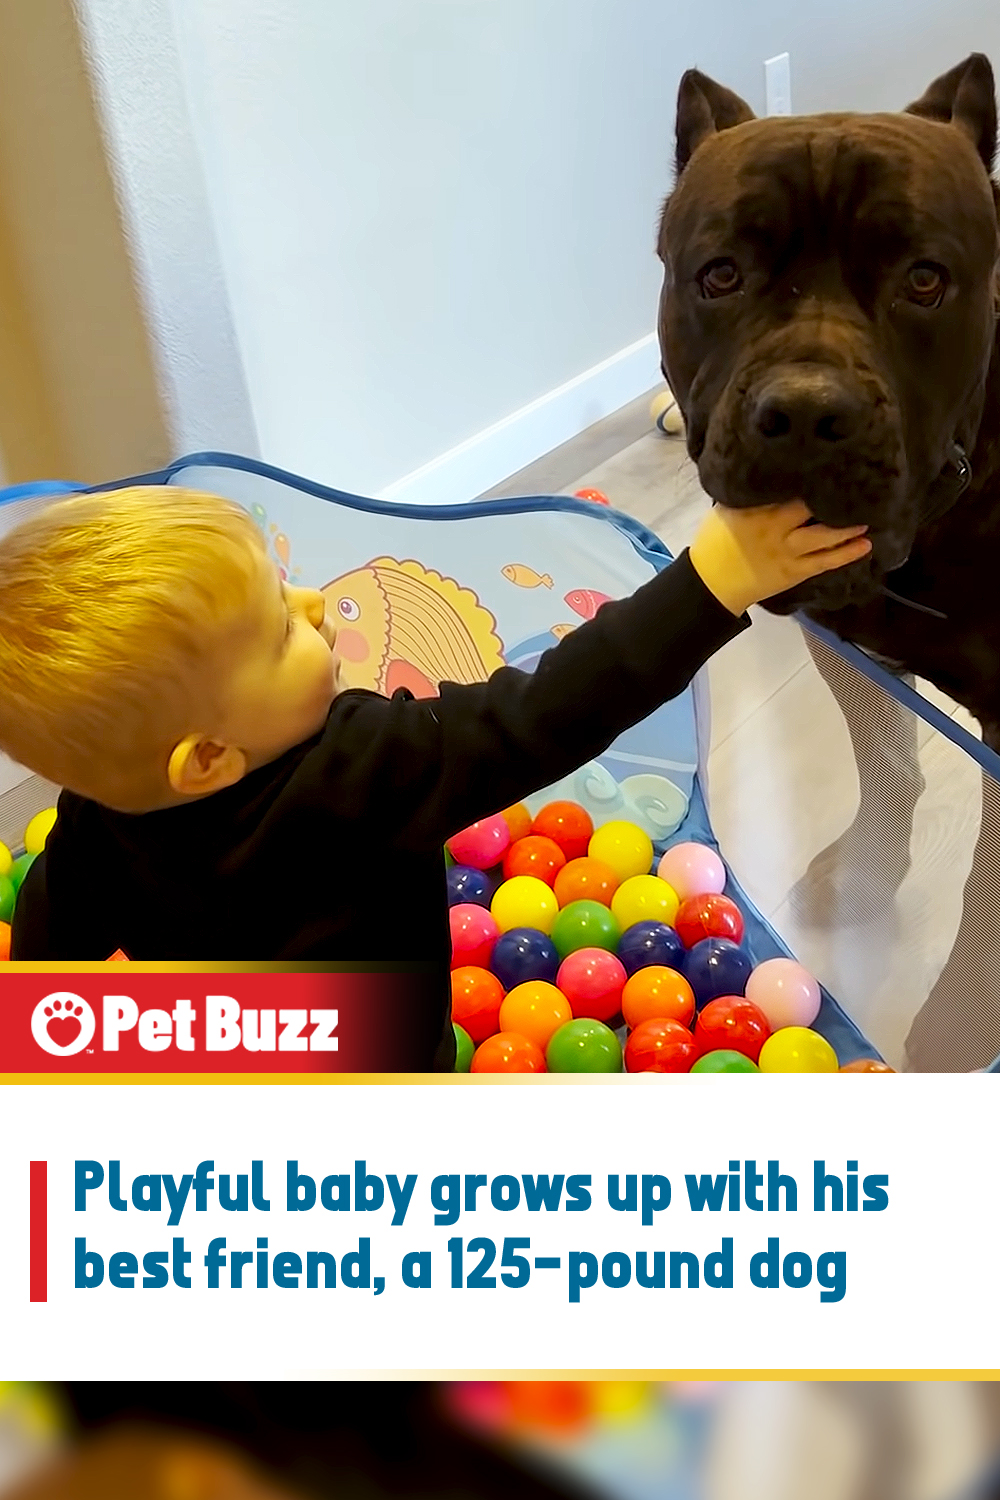 Playful baby grows up with his best friend, a 125-pound dog